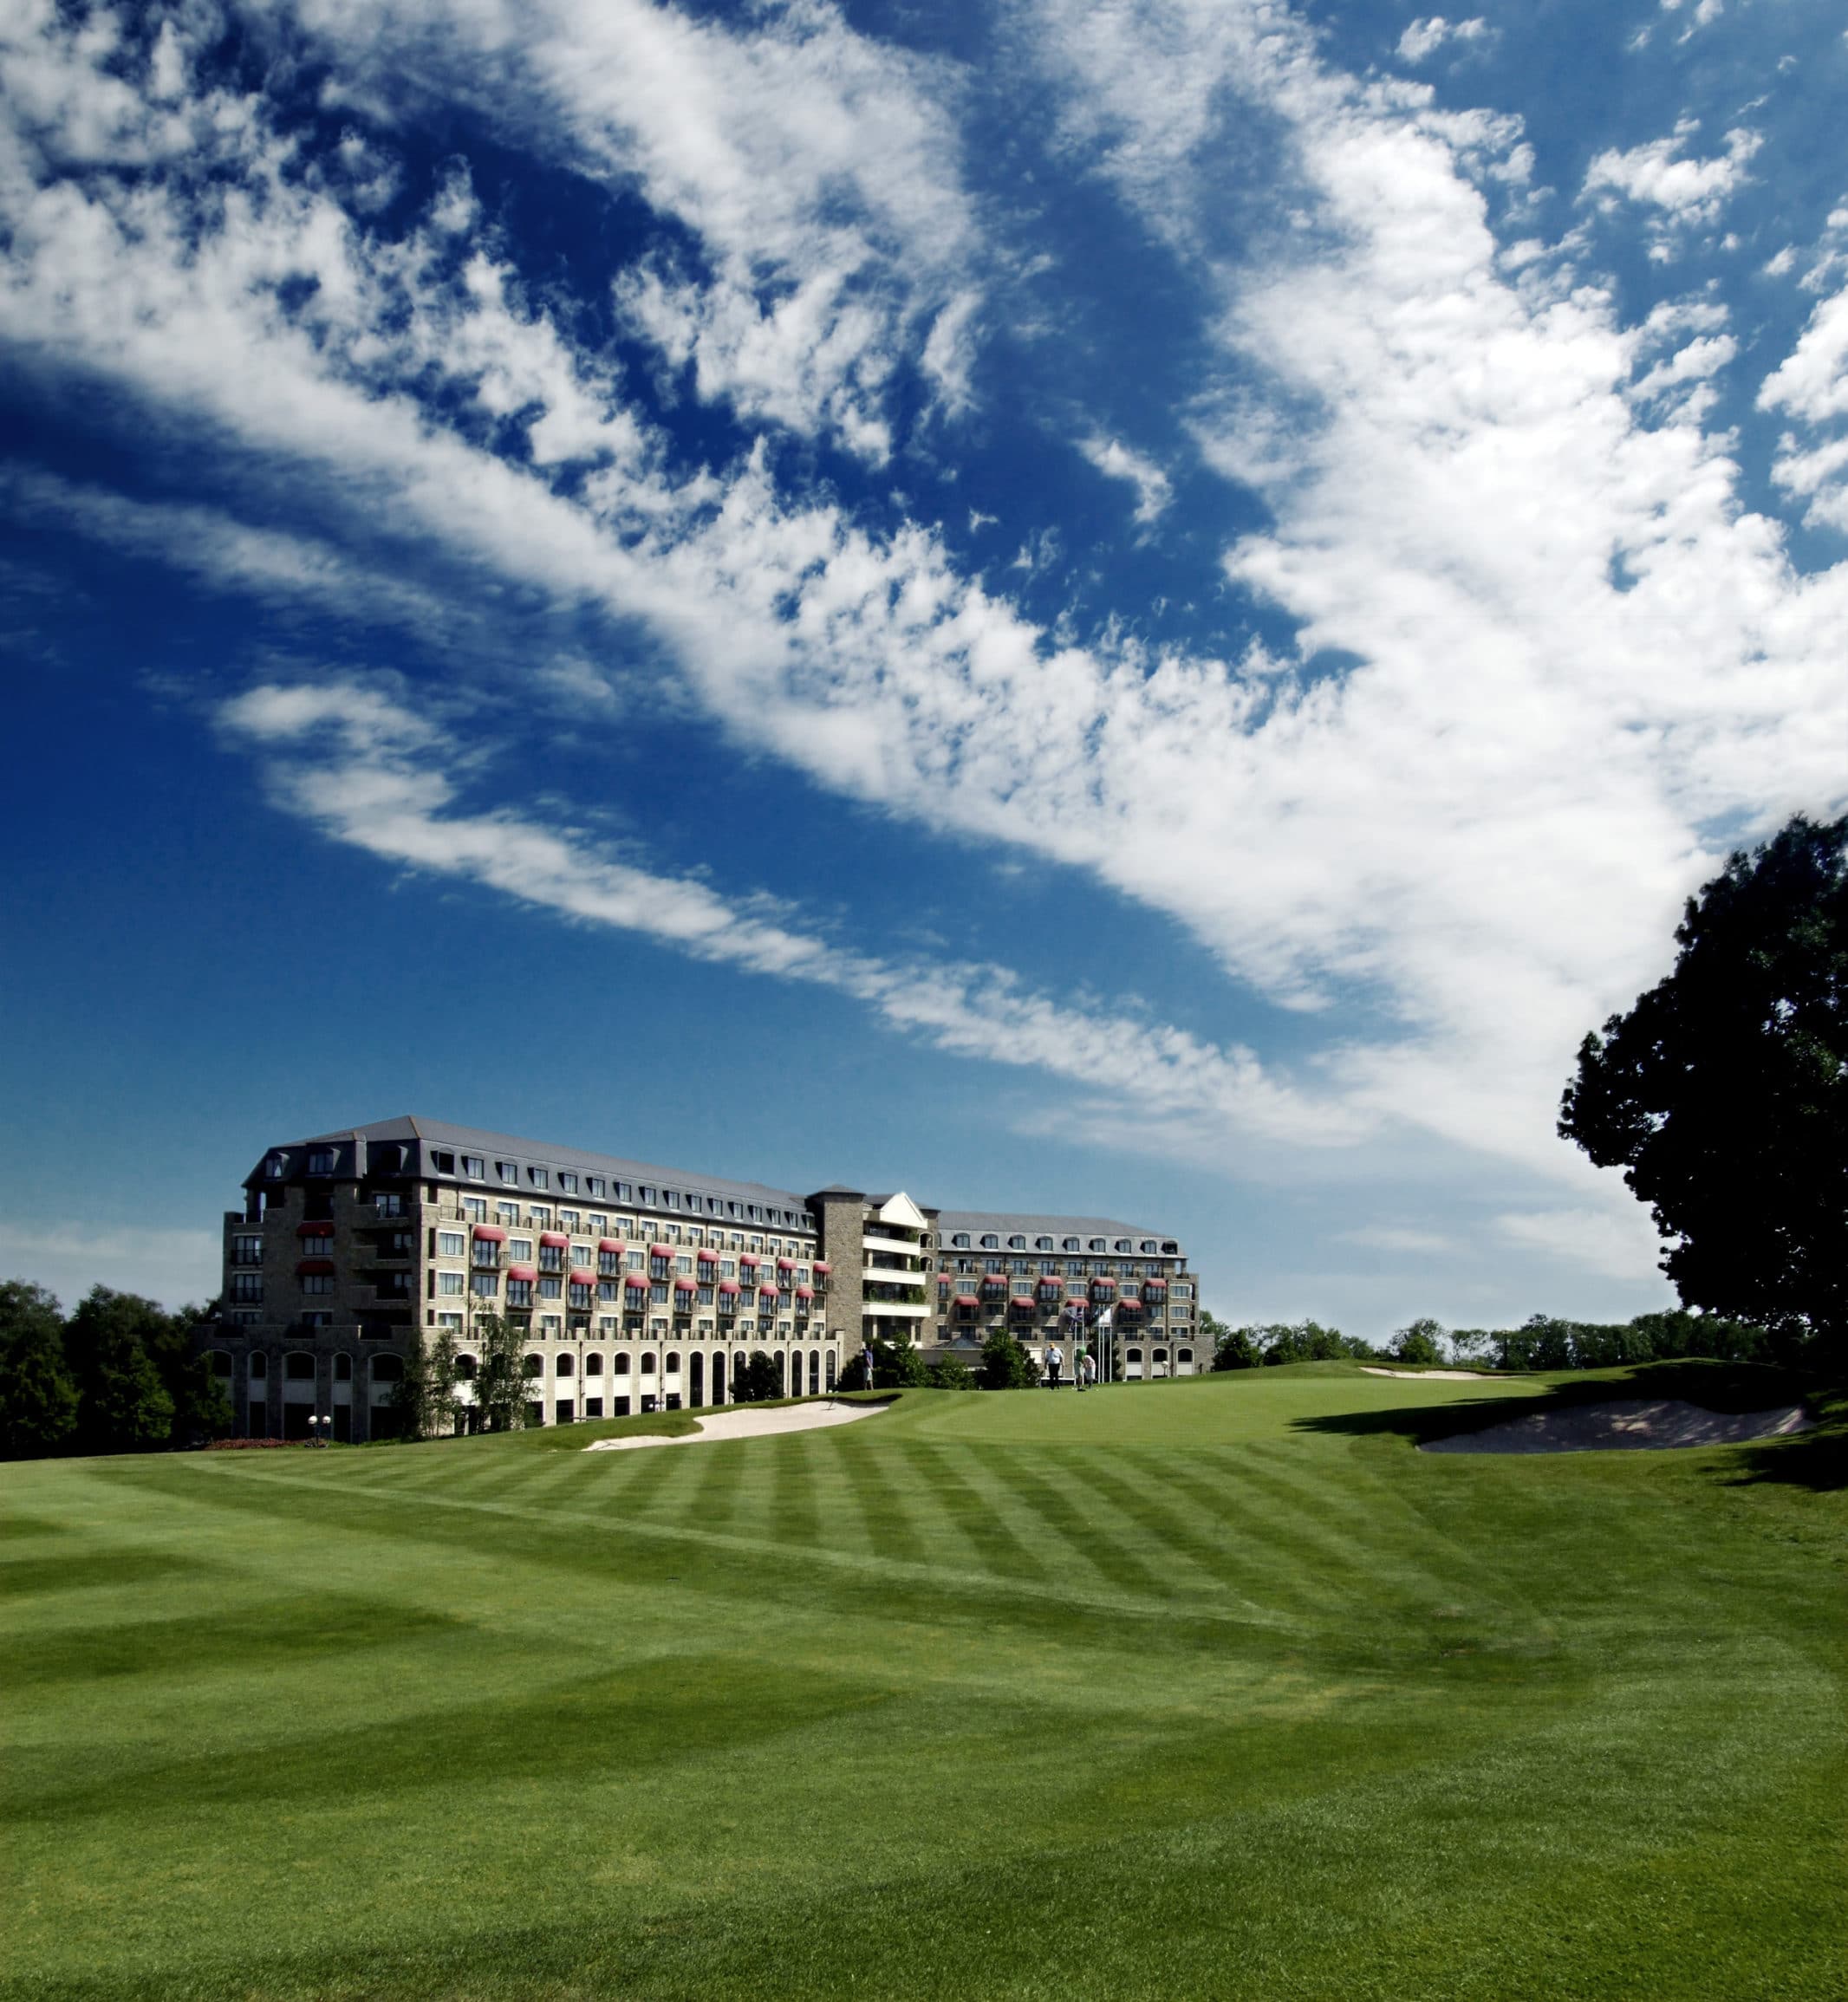 Make the Celtic Manor your base for exploring South Wales